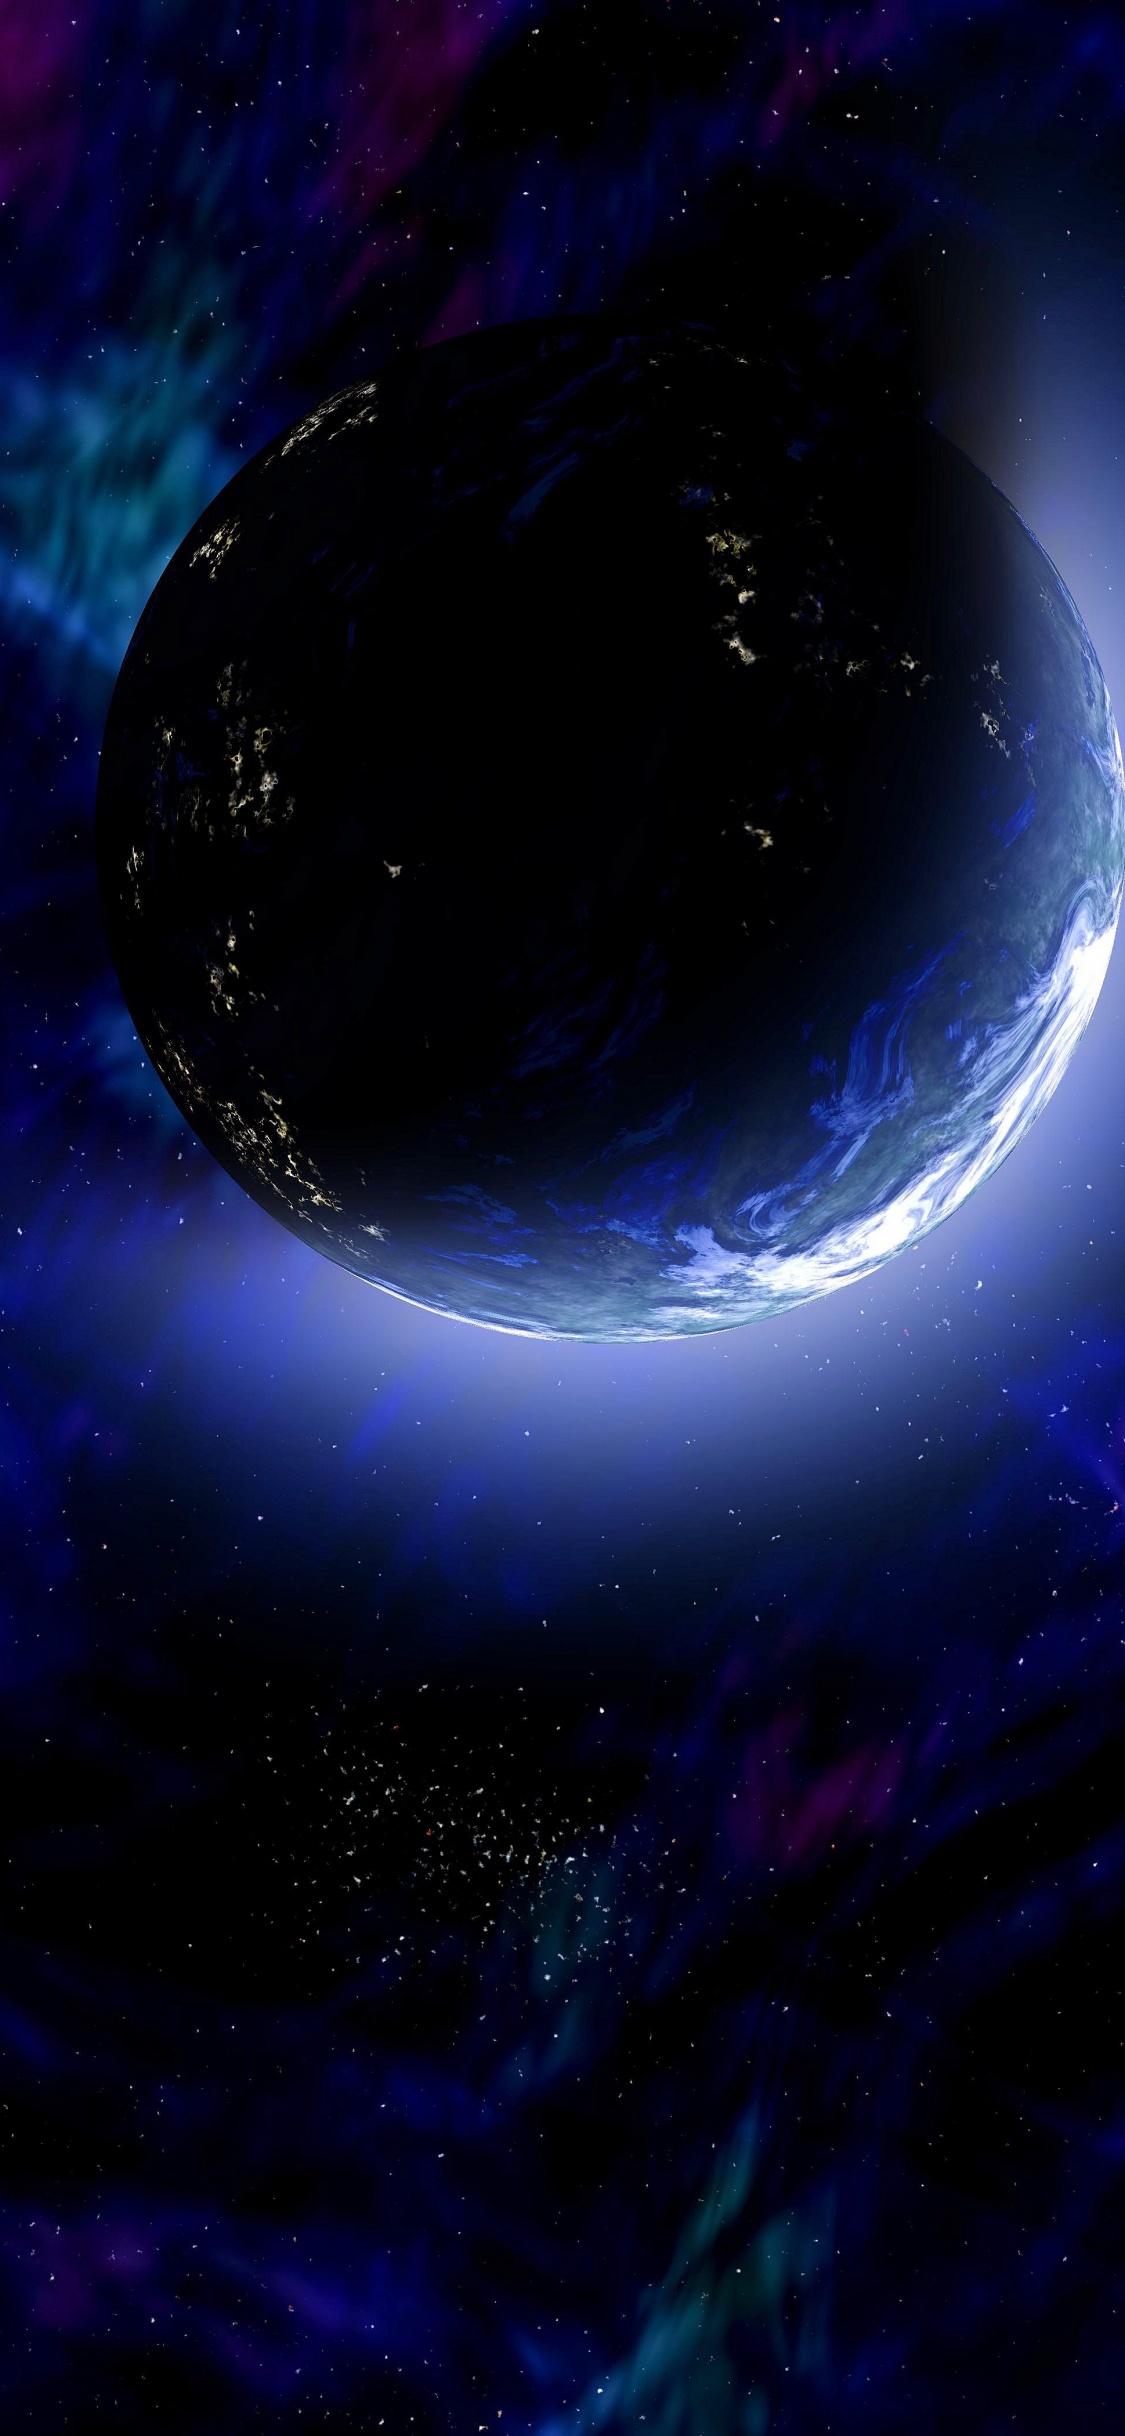 Blue and White Planet Painting. Wallpaper in 1125x2436 Resolution